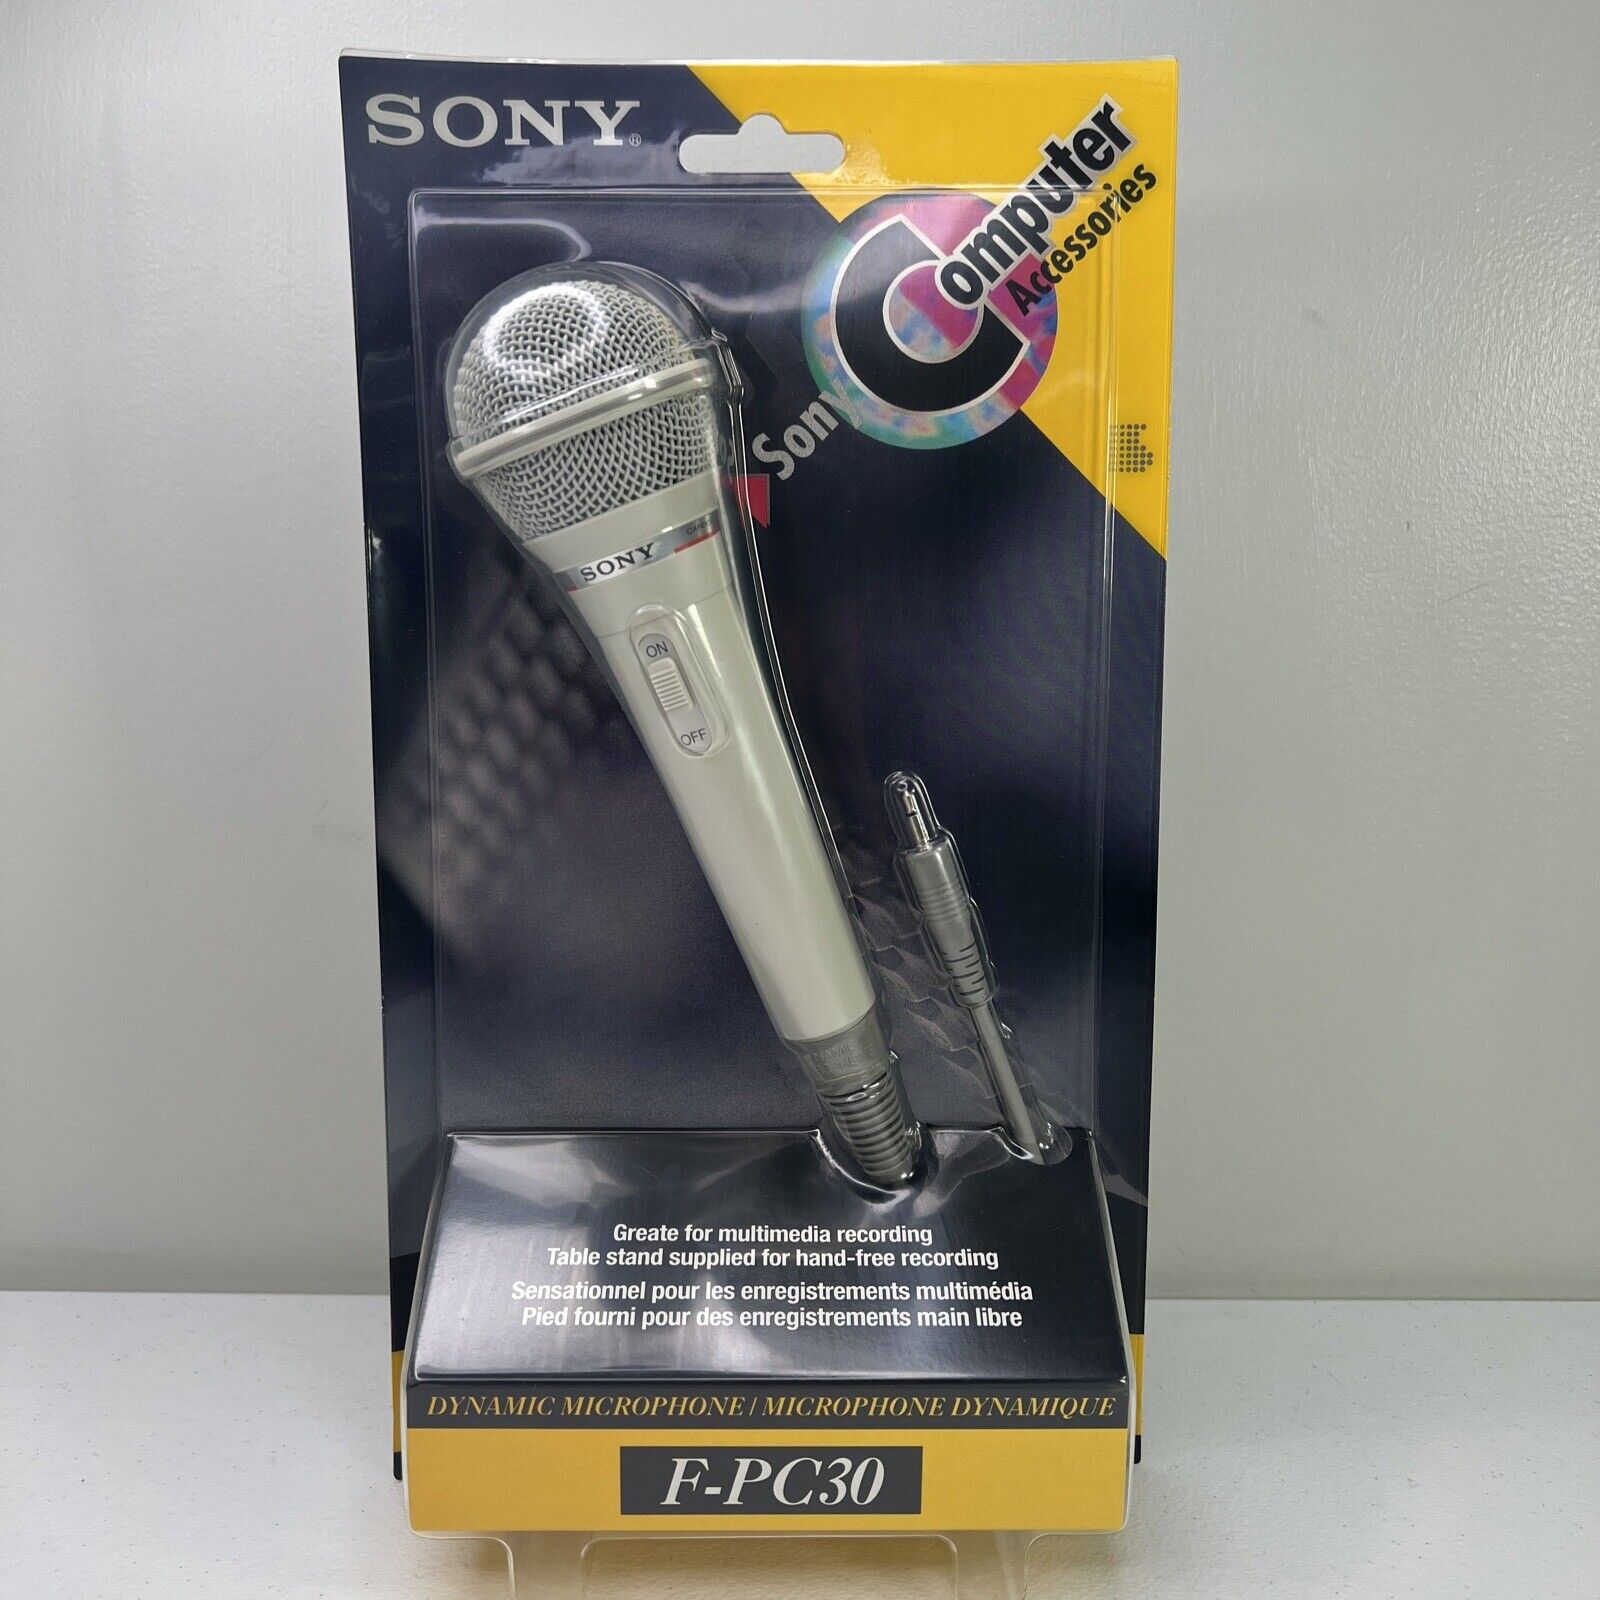 Sony F-PC30 Dynamic Microphone. Uni Directional. Vintage Microphone NOS